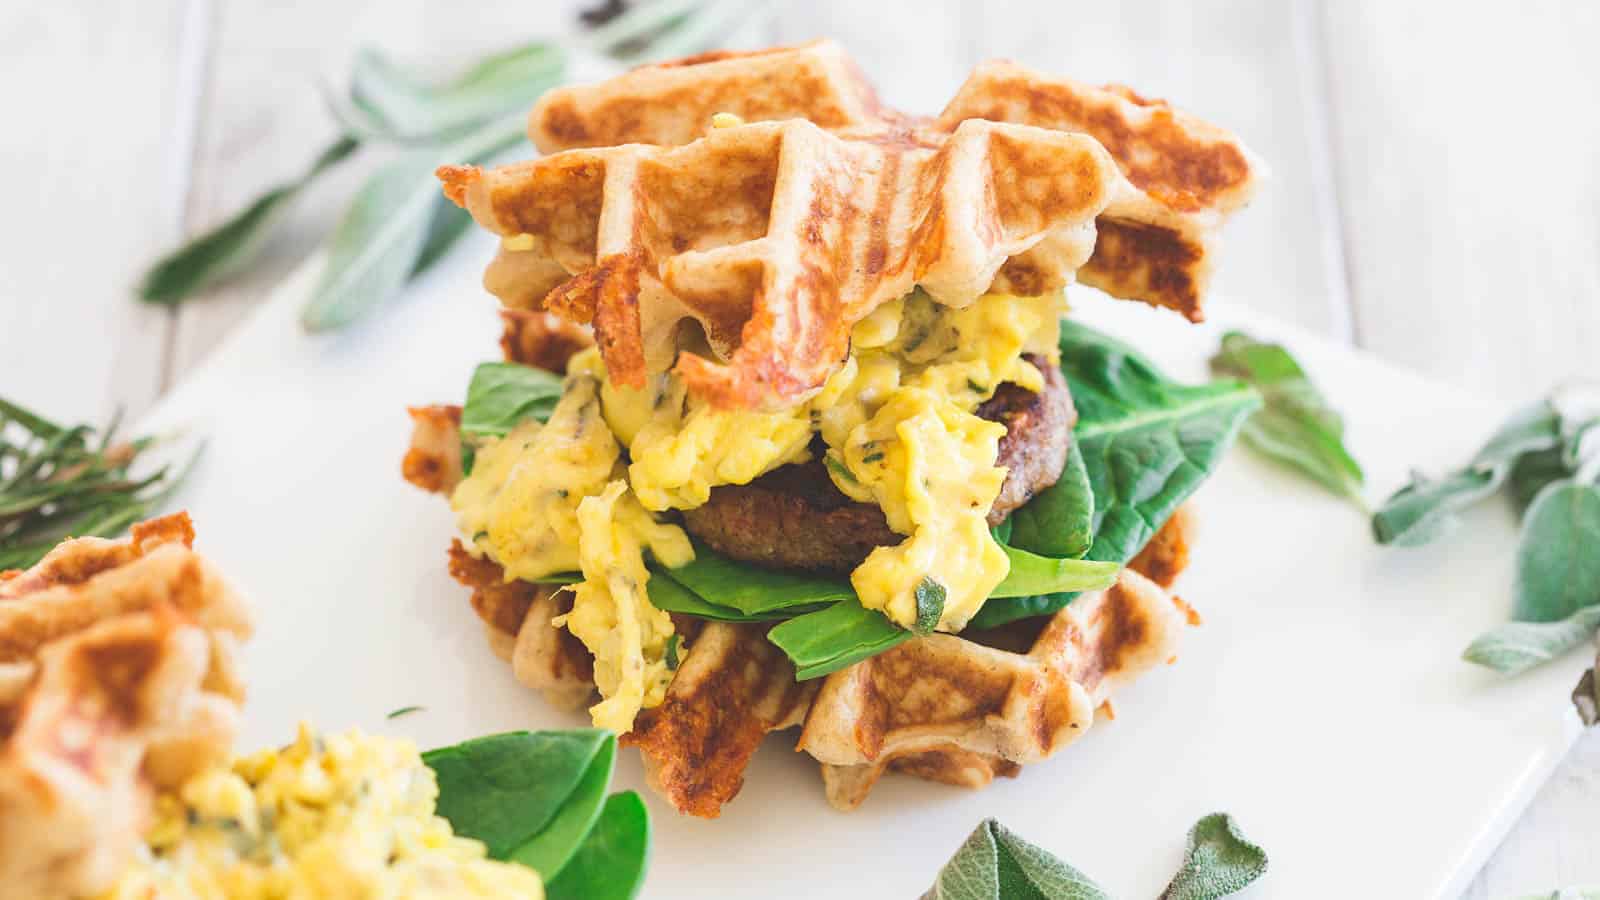 Cheddar sausage and egg waffle sandwiches with baby greens on white platter.